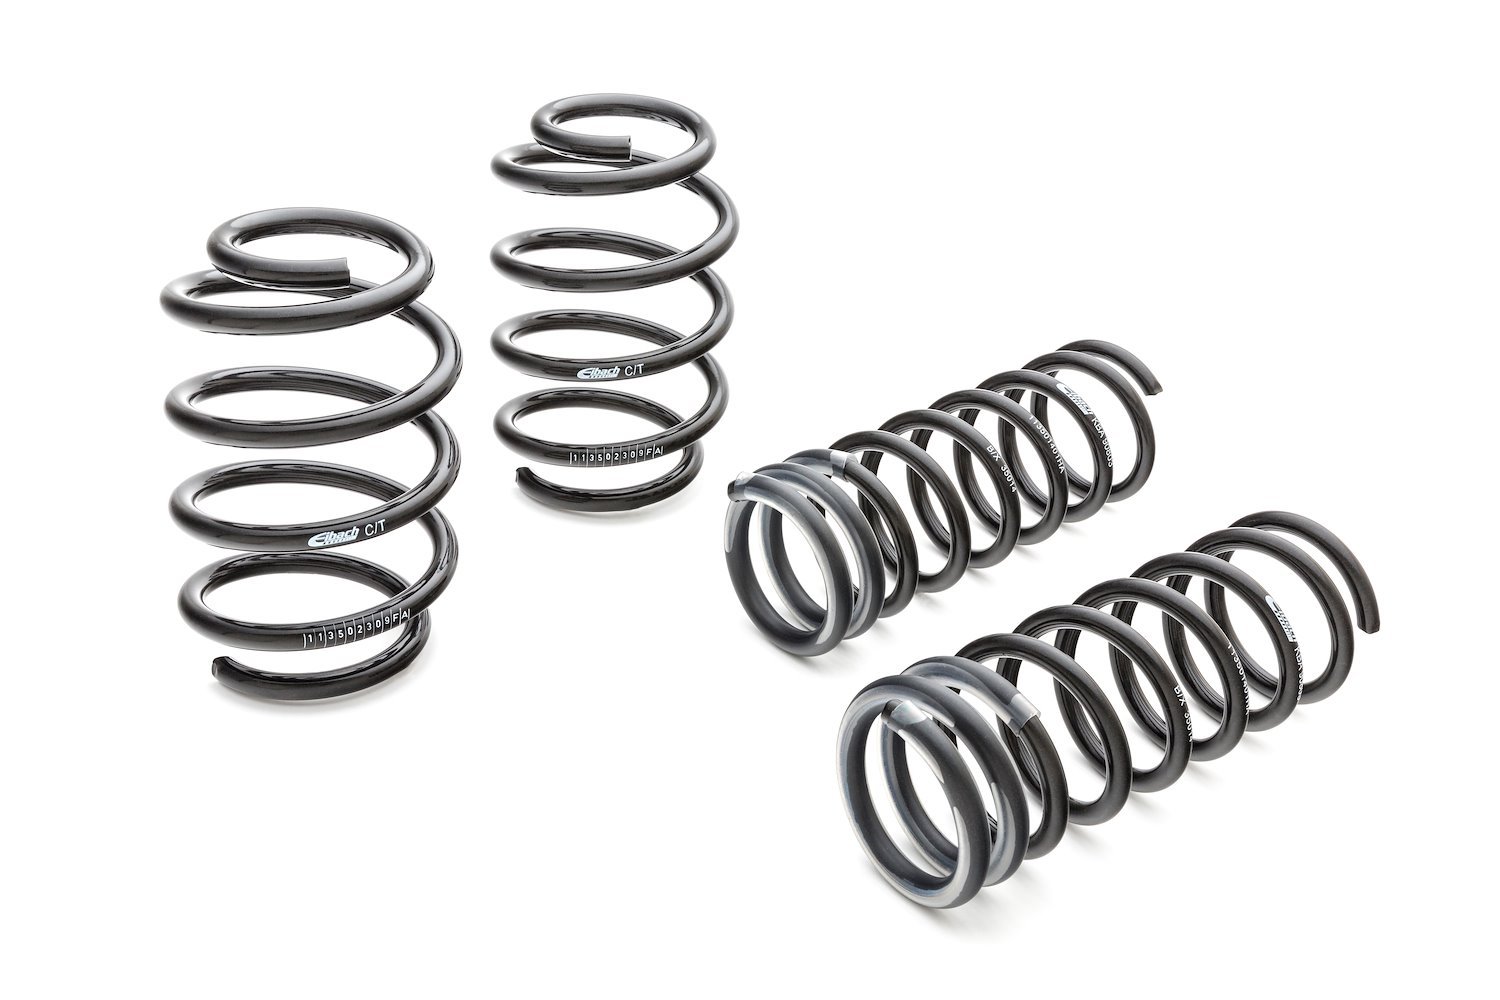 6389.140 Pro-Kit Lowering Springs 2009-2016 for Nissan GT-R .800 in. Front/.500 in. Rear Drop